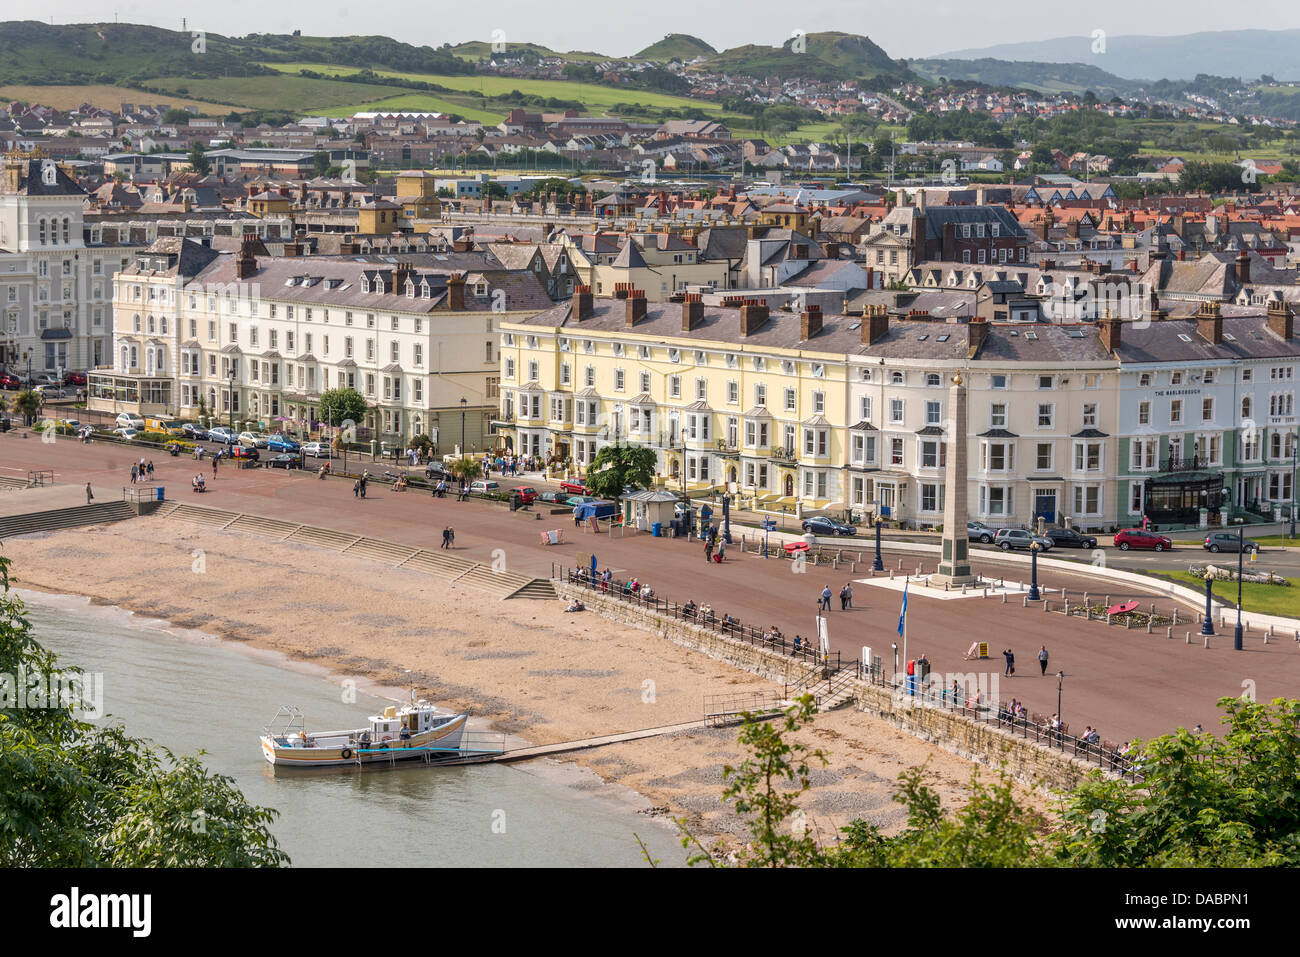 The sweeping bay, promenade and Victorian hotels on the North Bay of Llandudno in Clwyd North Wales. Stock Photo